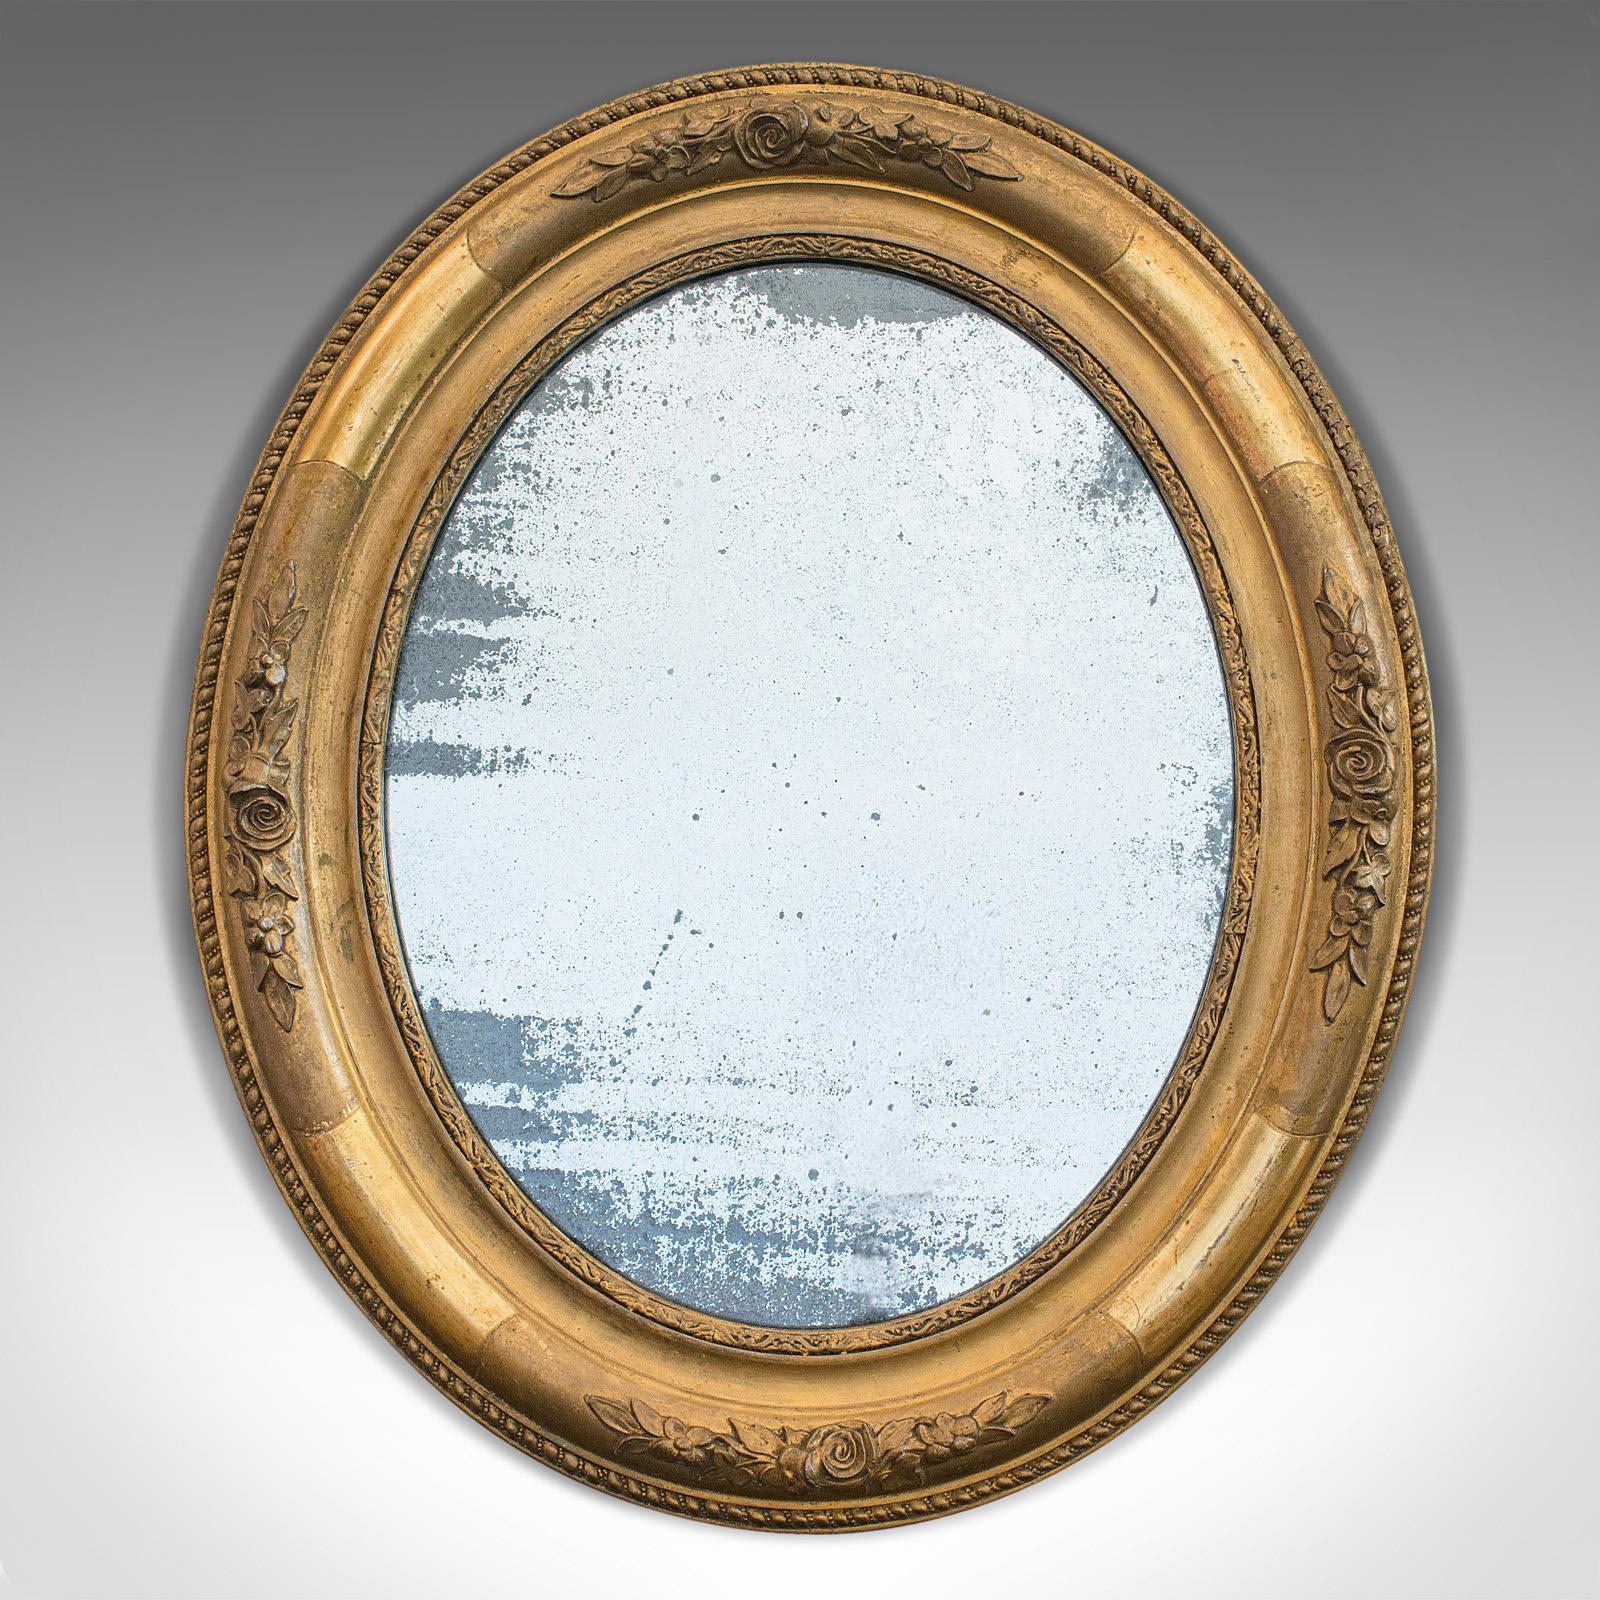 This is an antique oval mirror. An English, gilt gesso mirror with mercury plate, dating to the Georgian period, circa 1800.

Superb Georgian mirror
Displays a desirable aged patina
Rich hues to gilt gesso frame
Desirable foxing to mercury